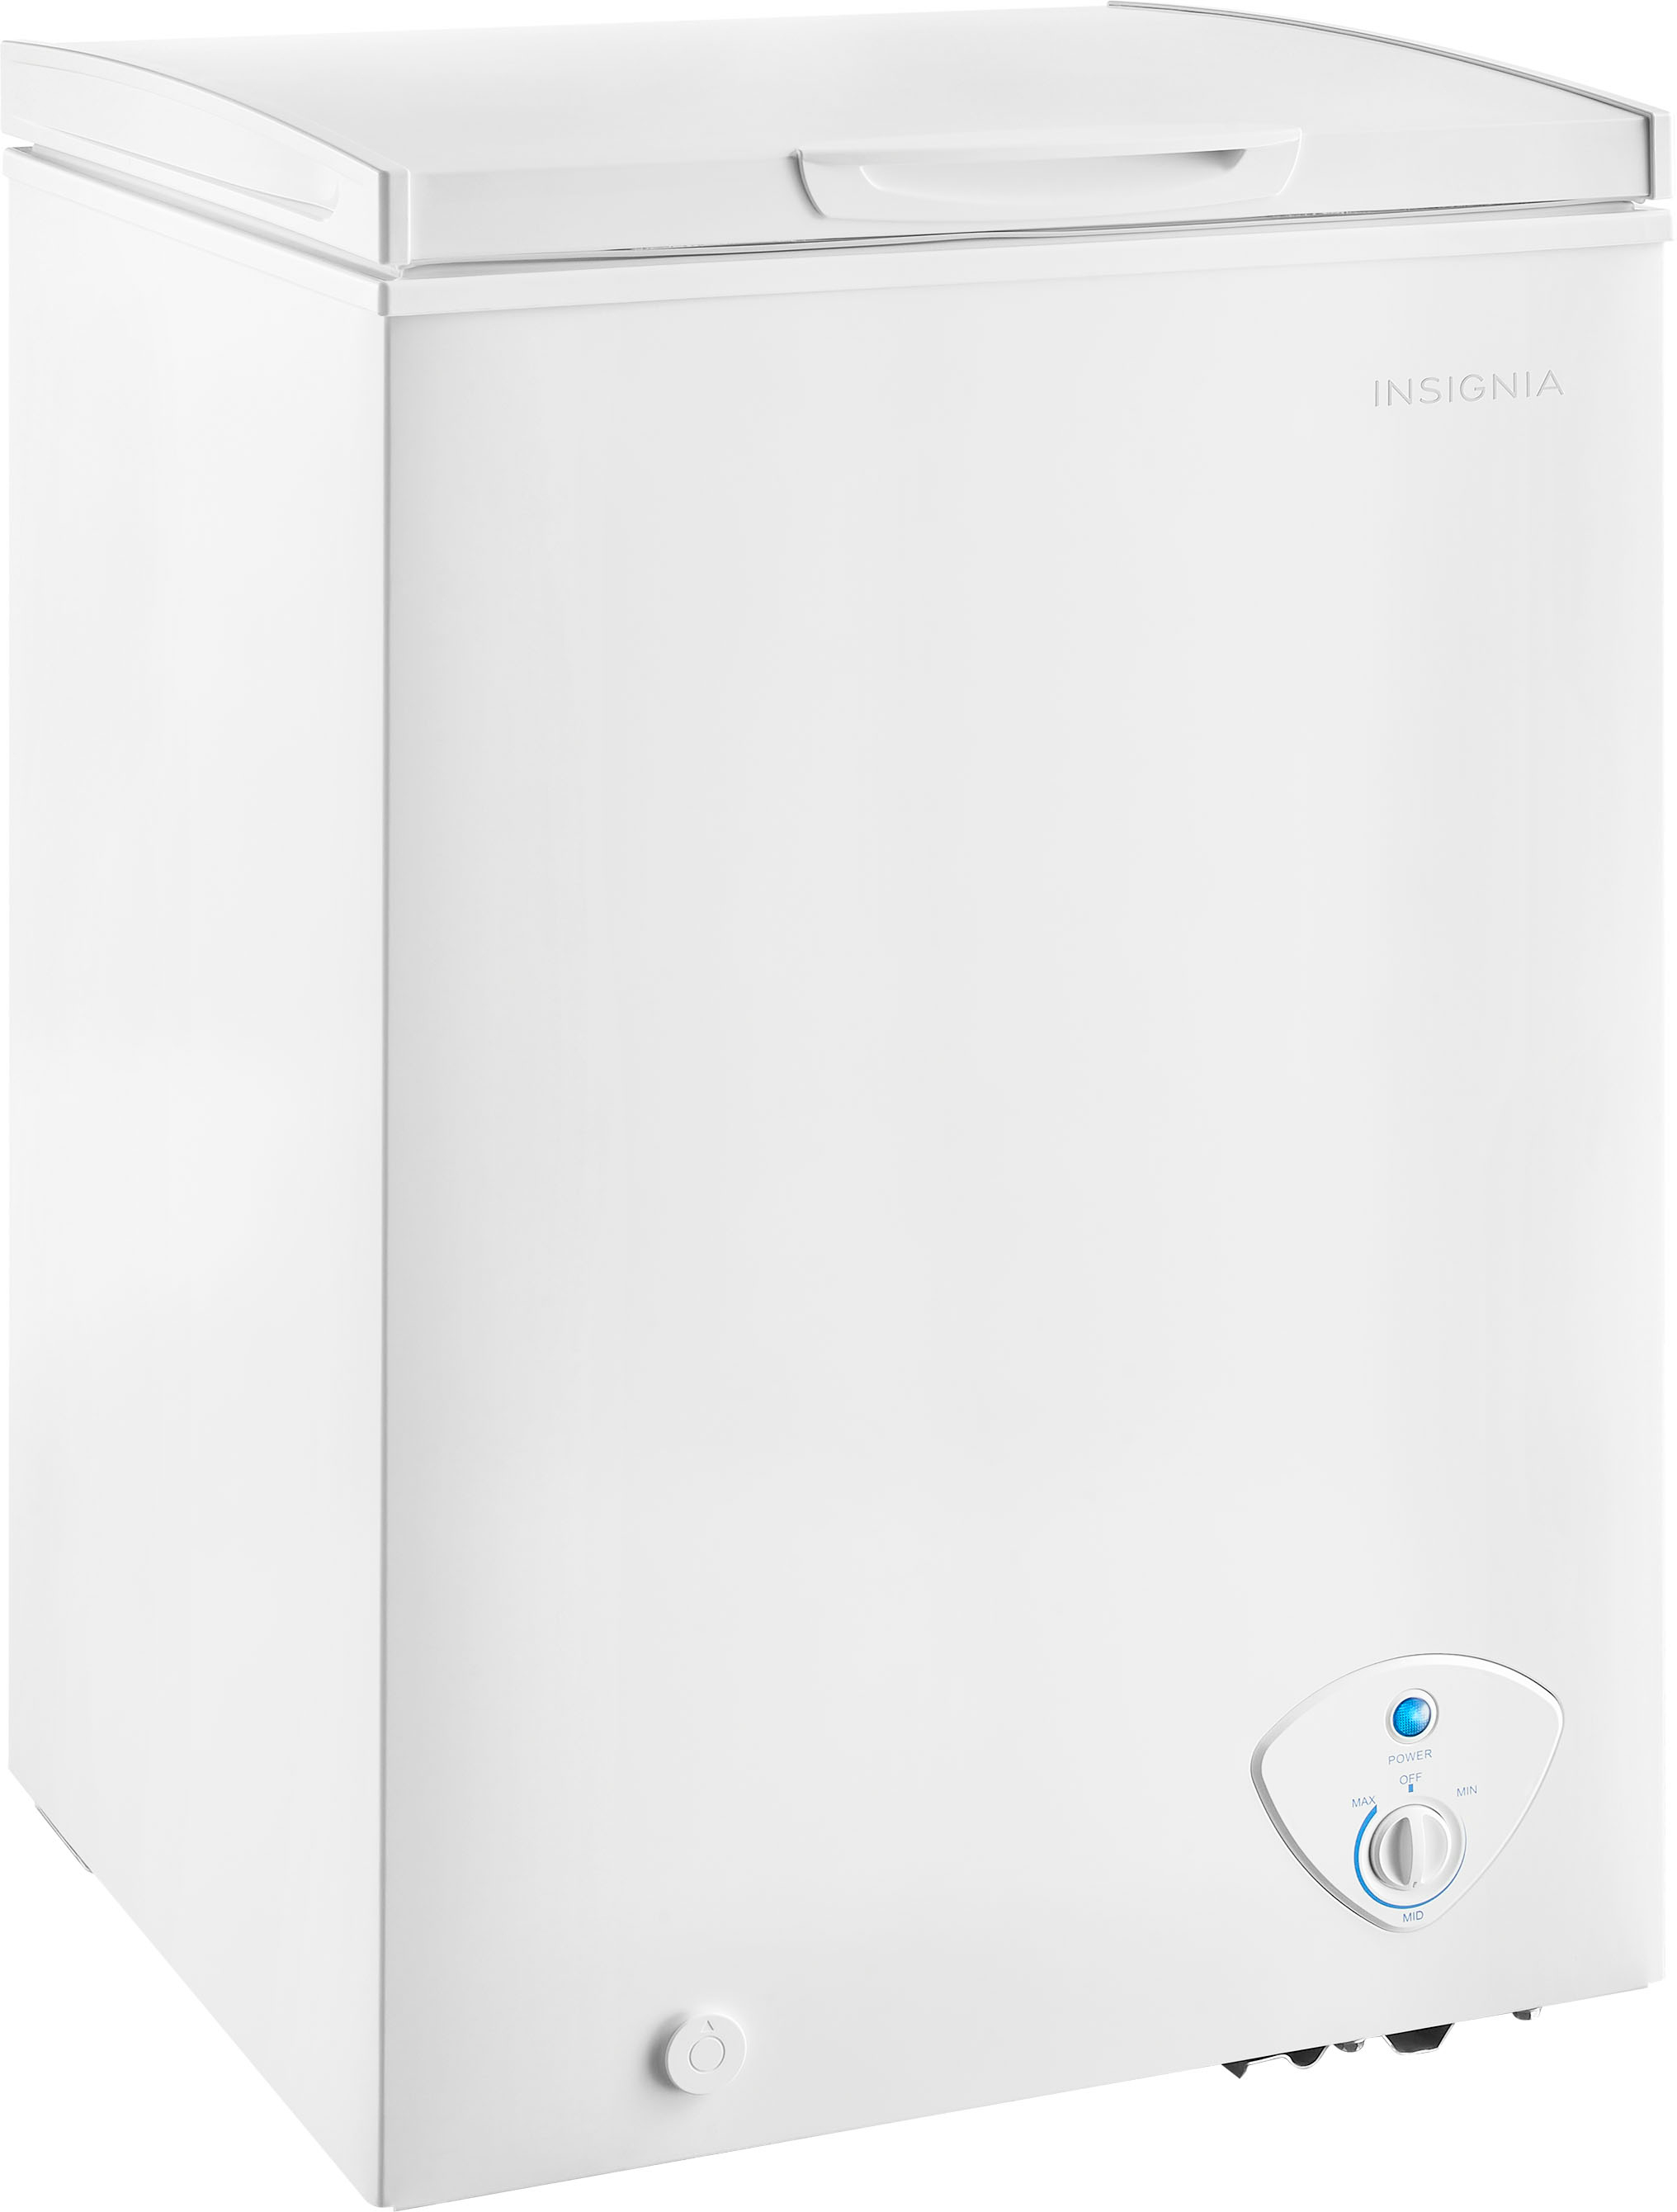 Angle View: Insignia™ - 3.5 Cu. Ft. Garage-Ready Chest Freezer - White